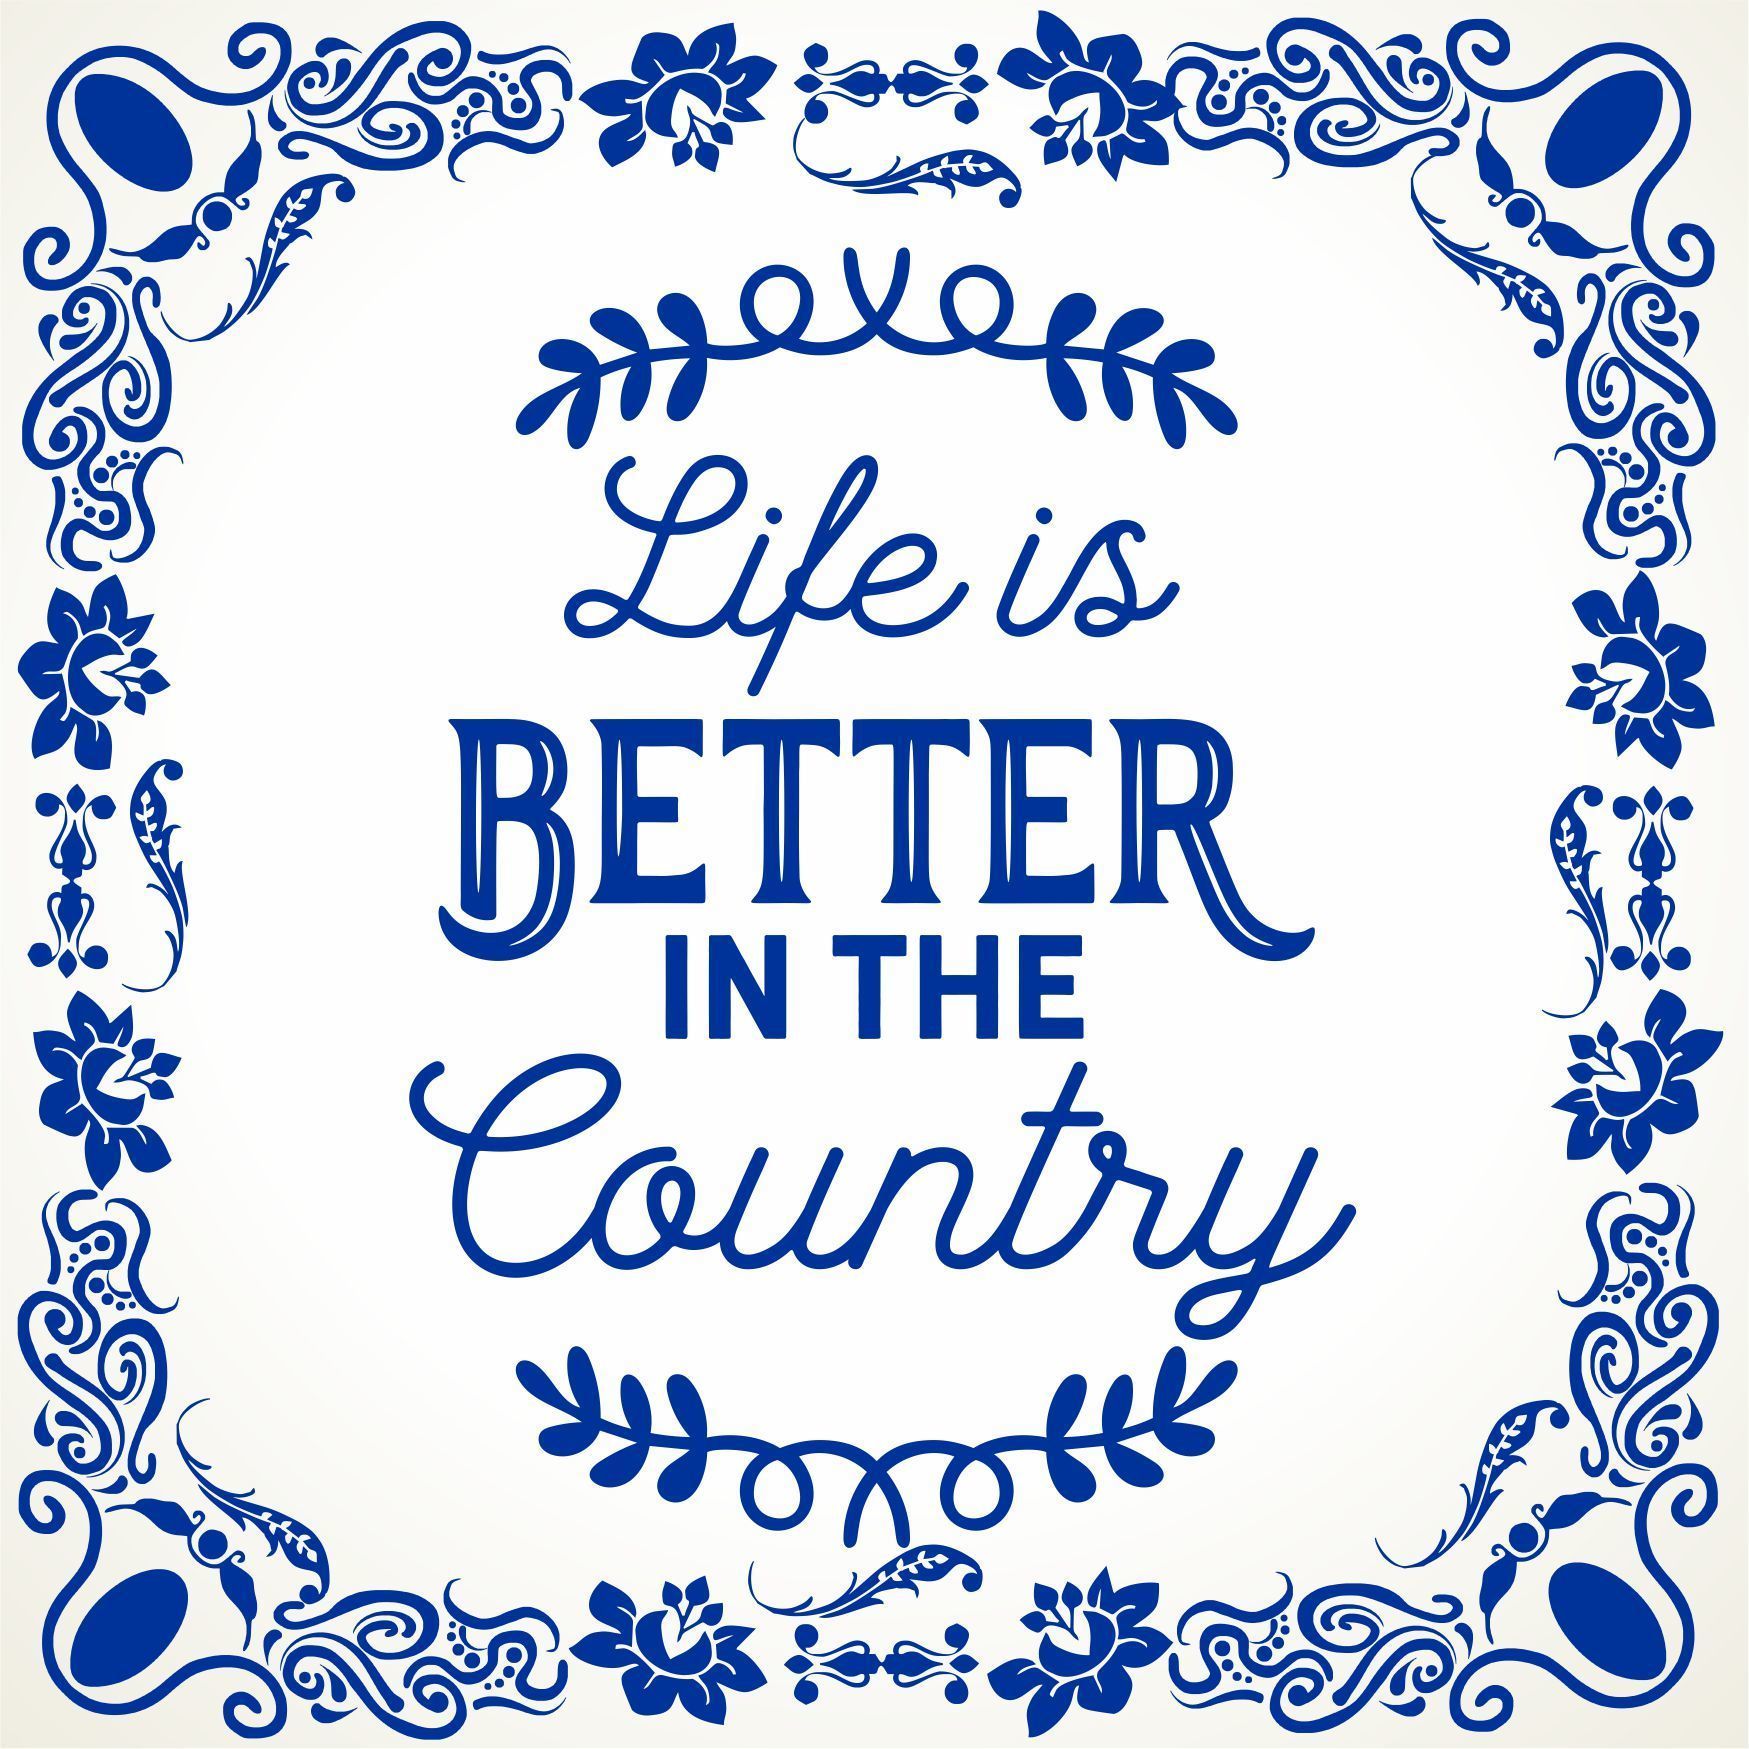 Life is better in the country tegeltje